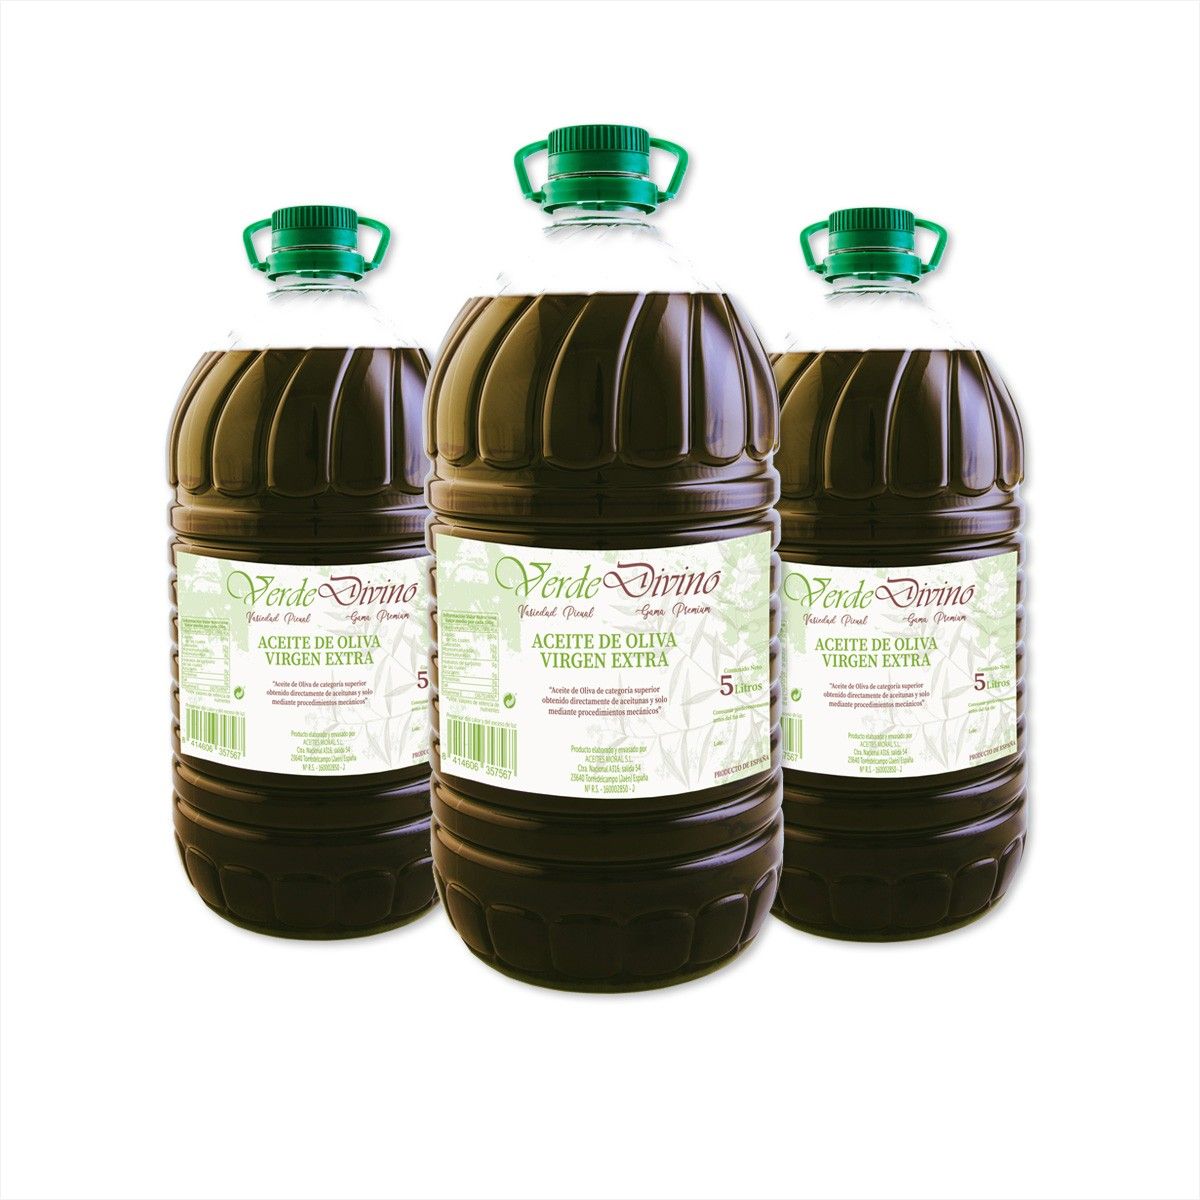 Carafes of Extra Virgin Olive Oil 5Litres 3 Units